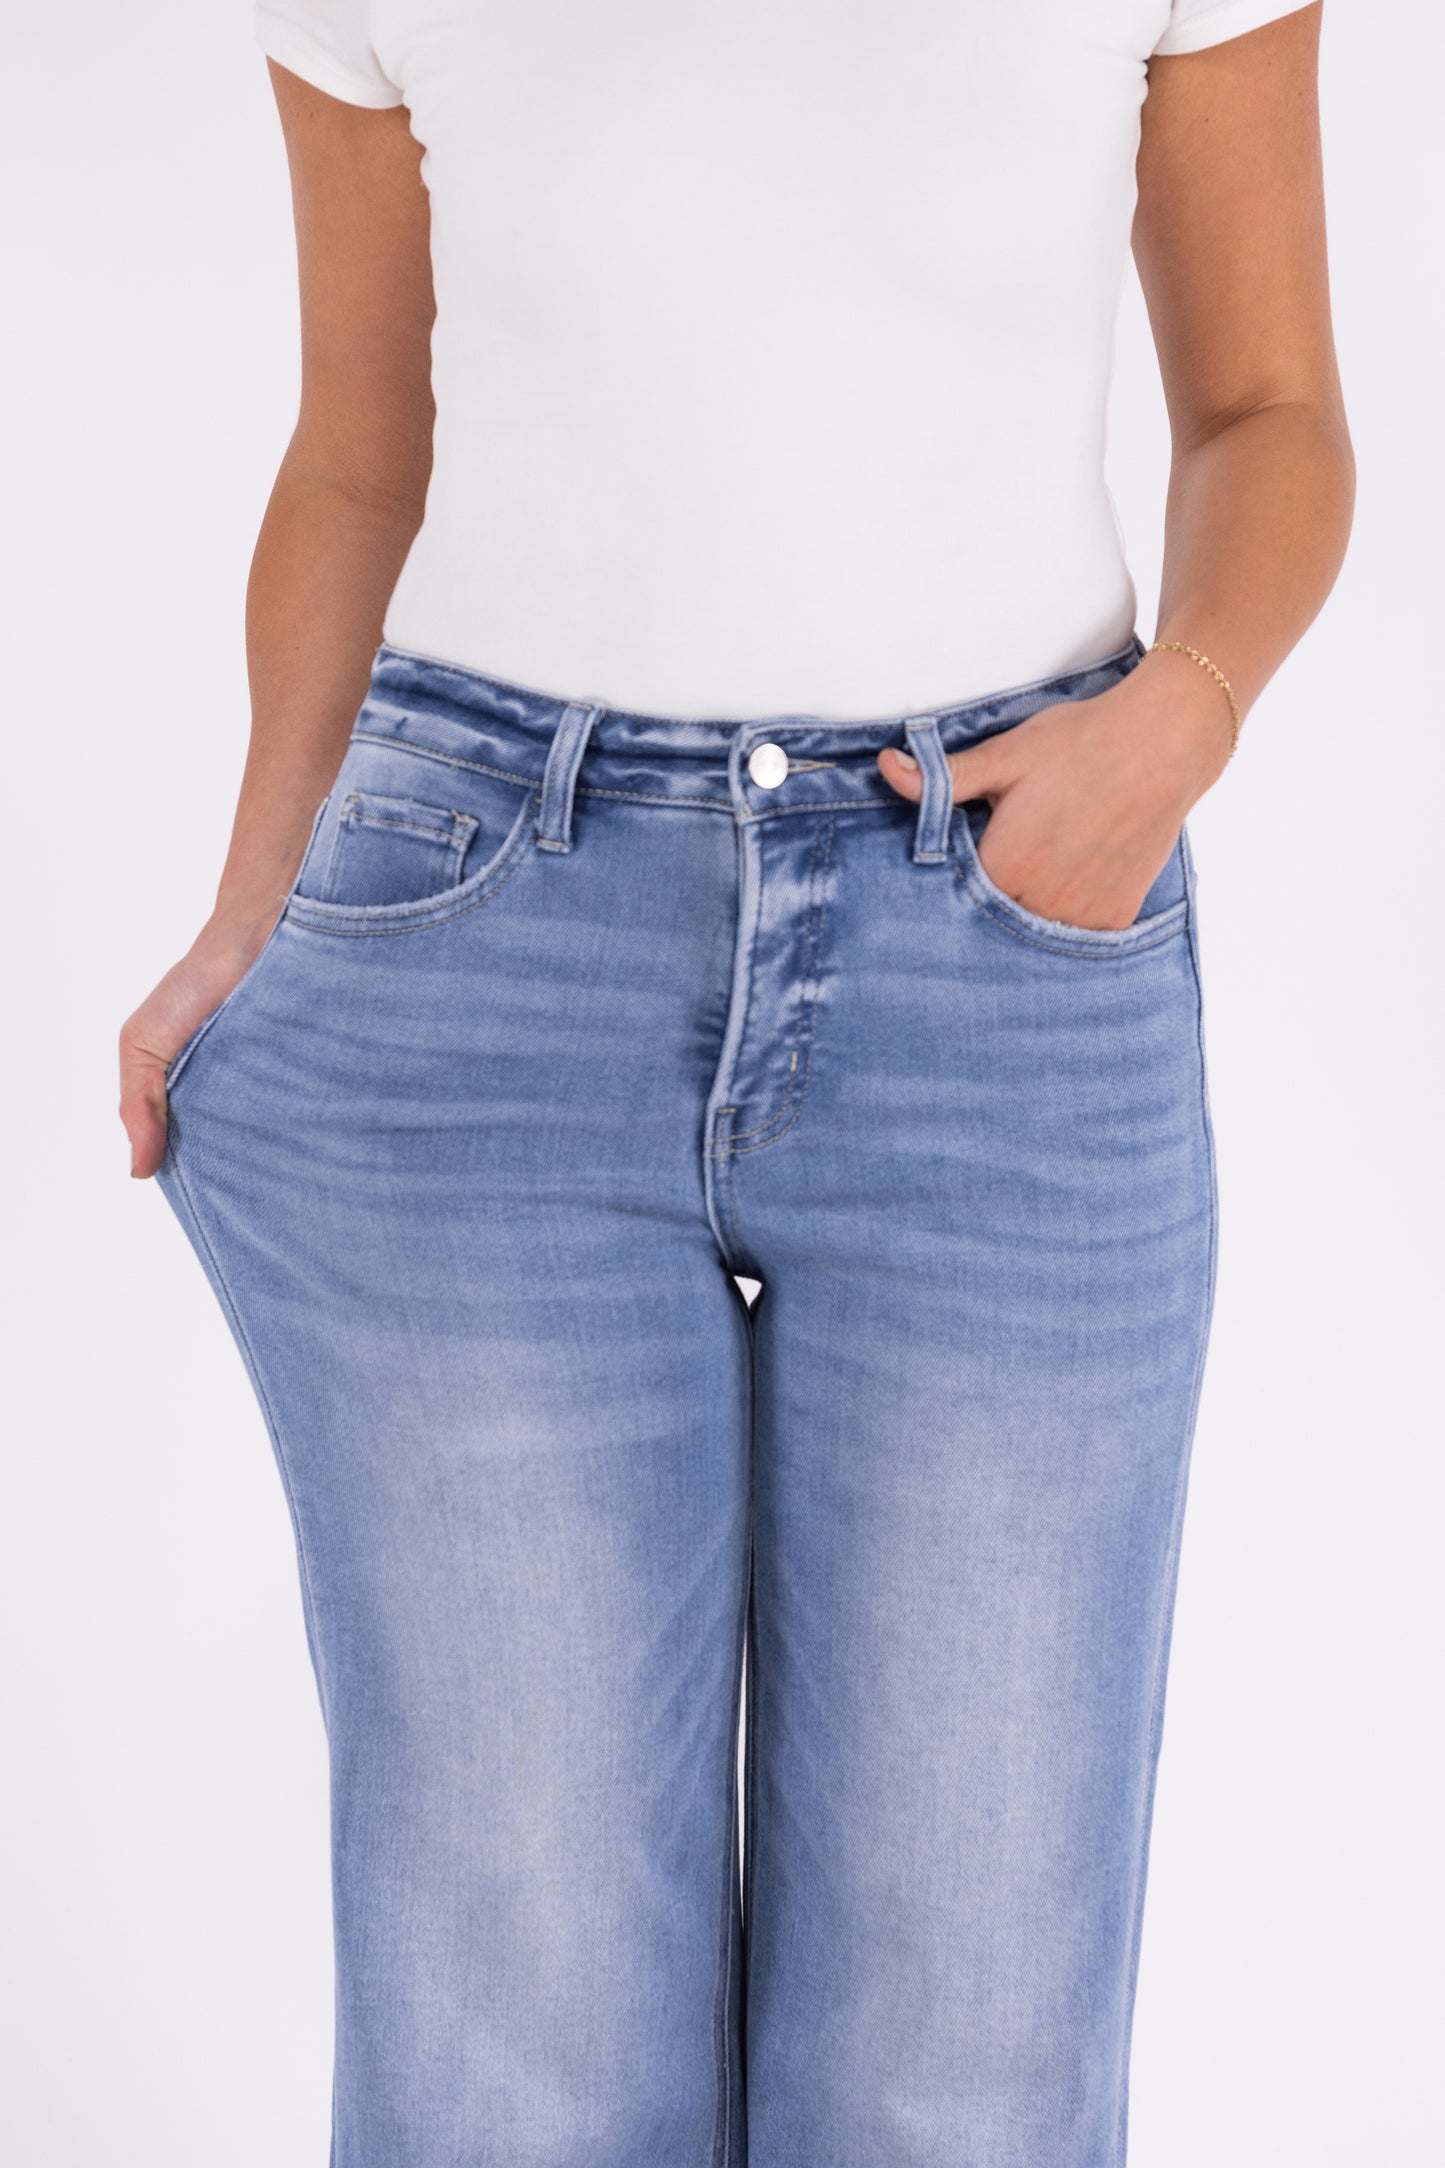 The Caitlin from Lovervet: High-Rise Cropped Wide Leg Denim